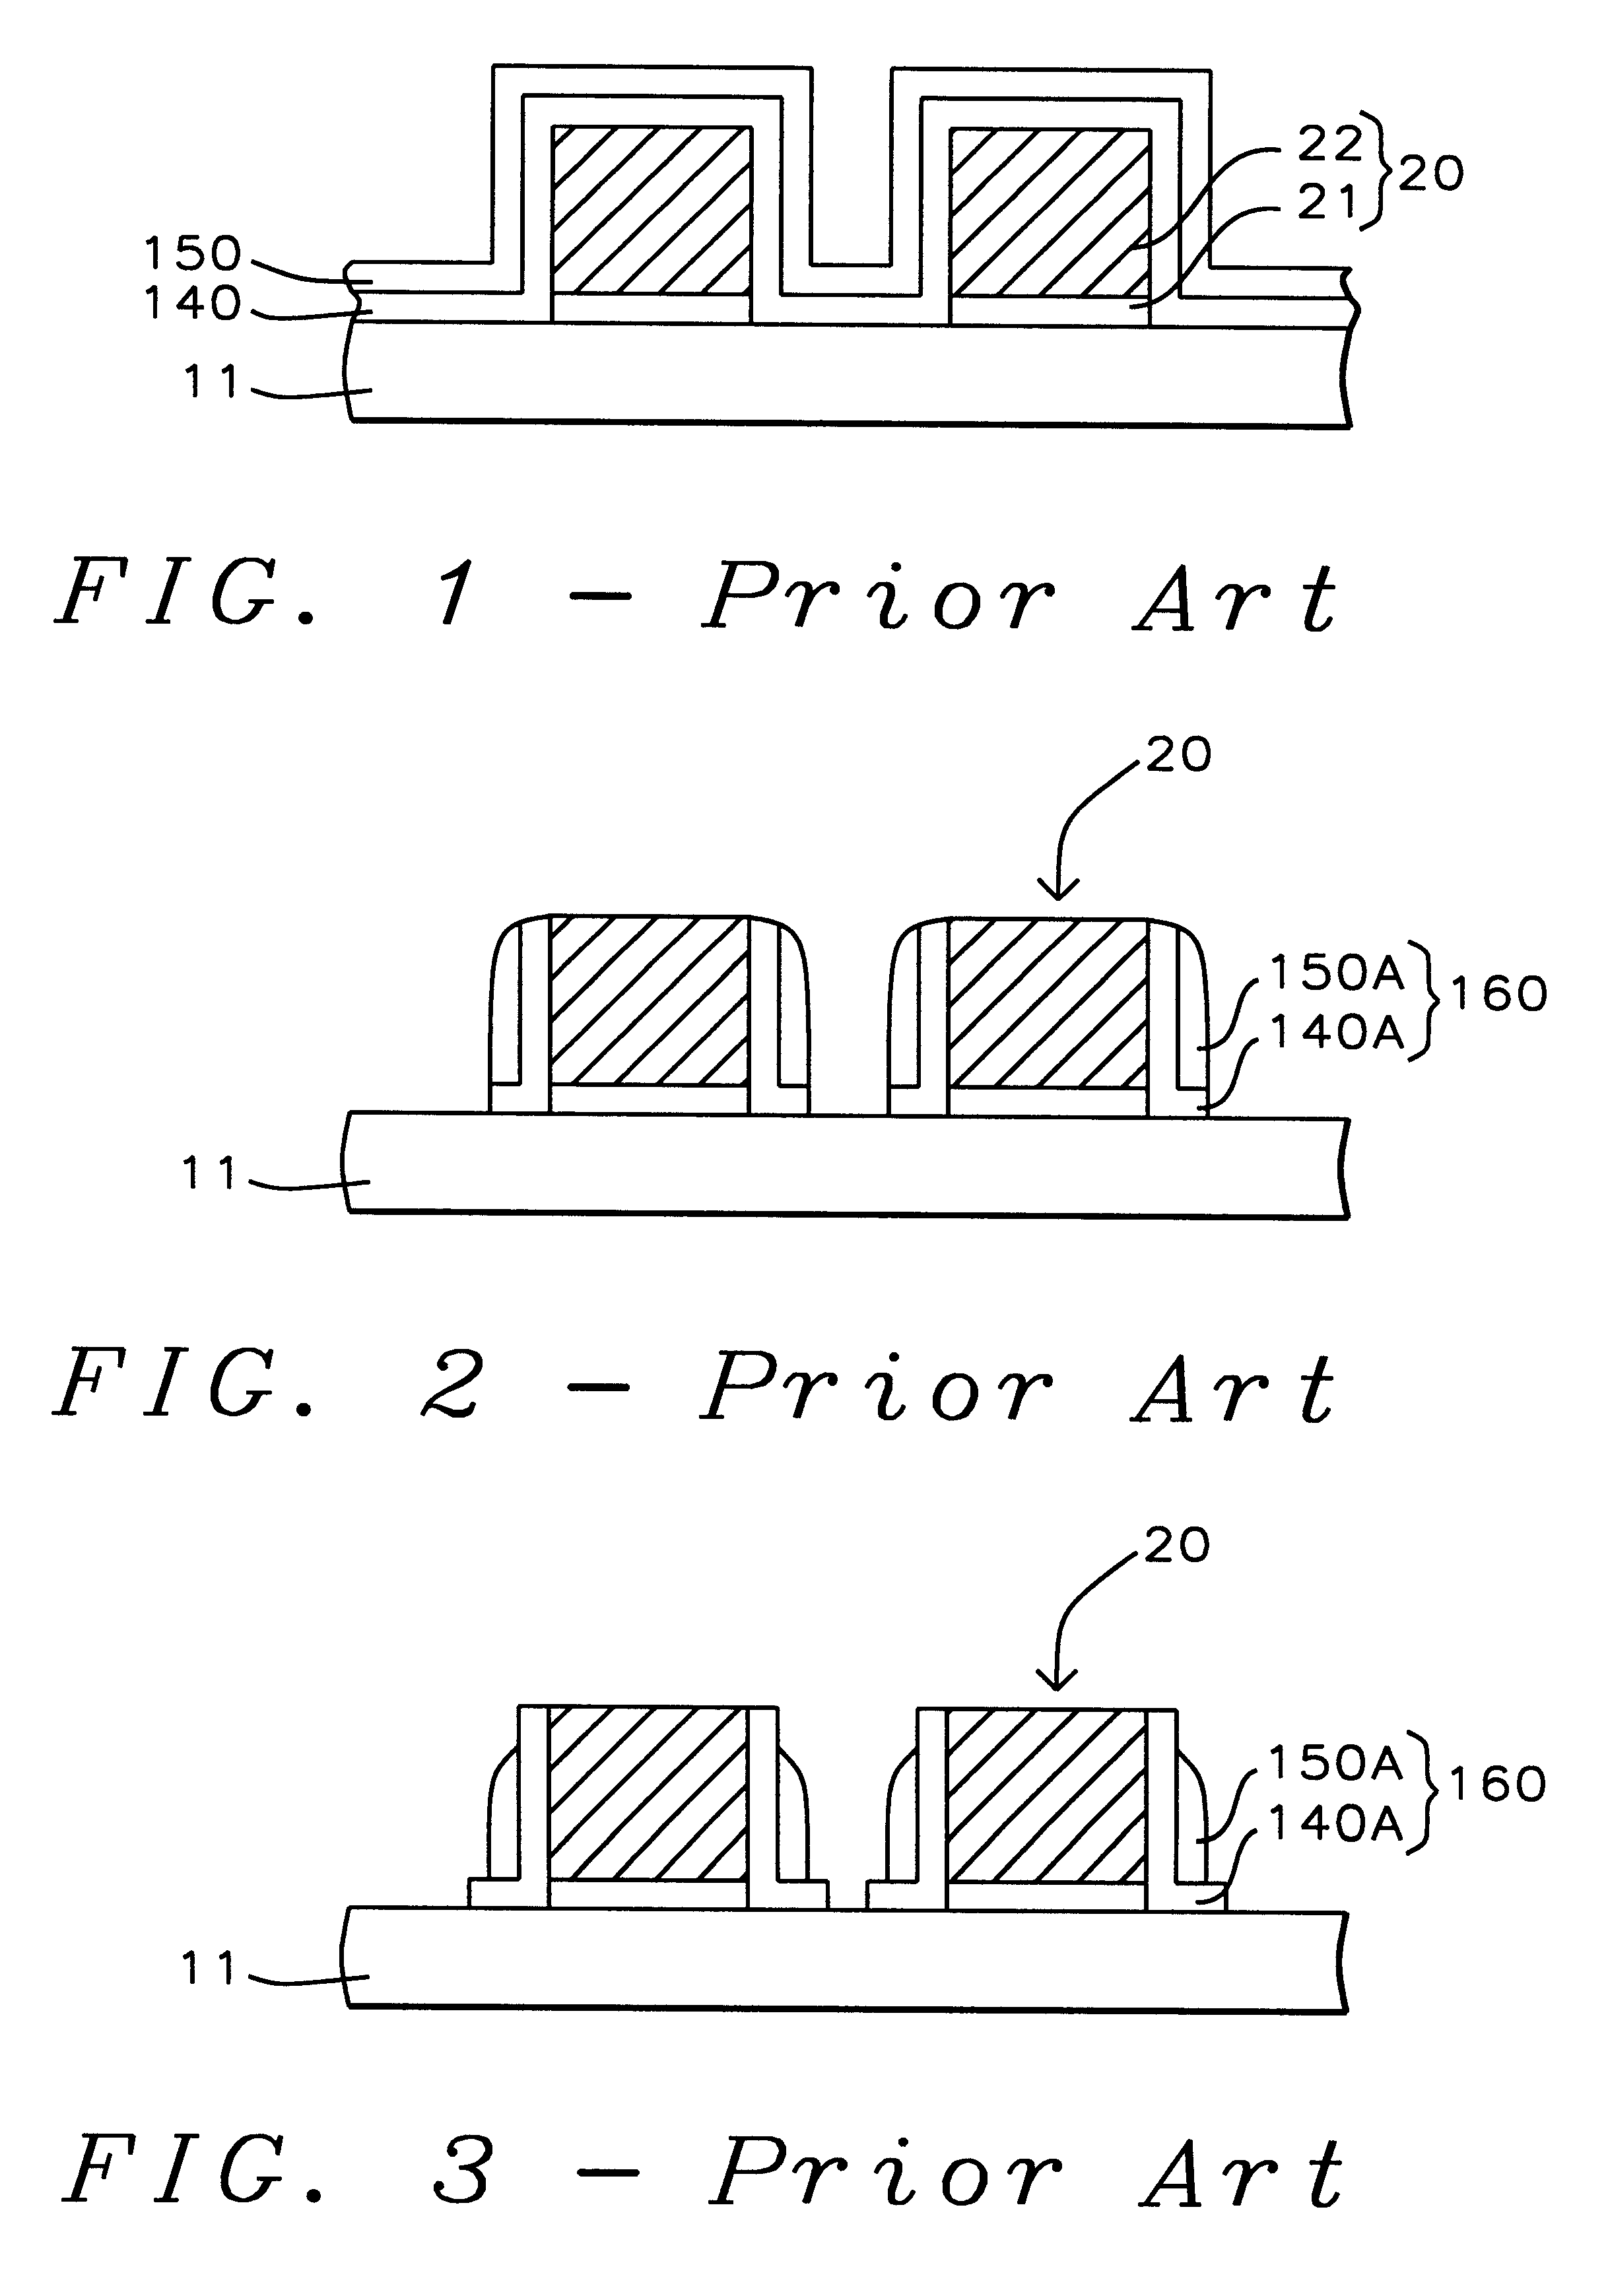 Method for forming an L-shaped spacer with a disposable organic top coating